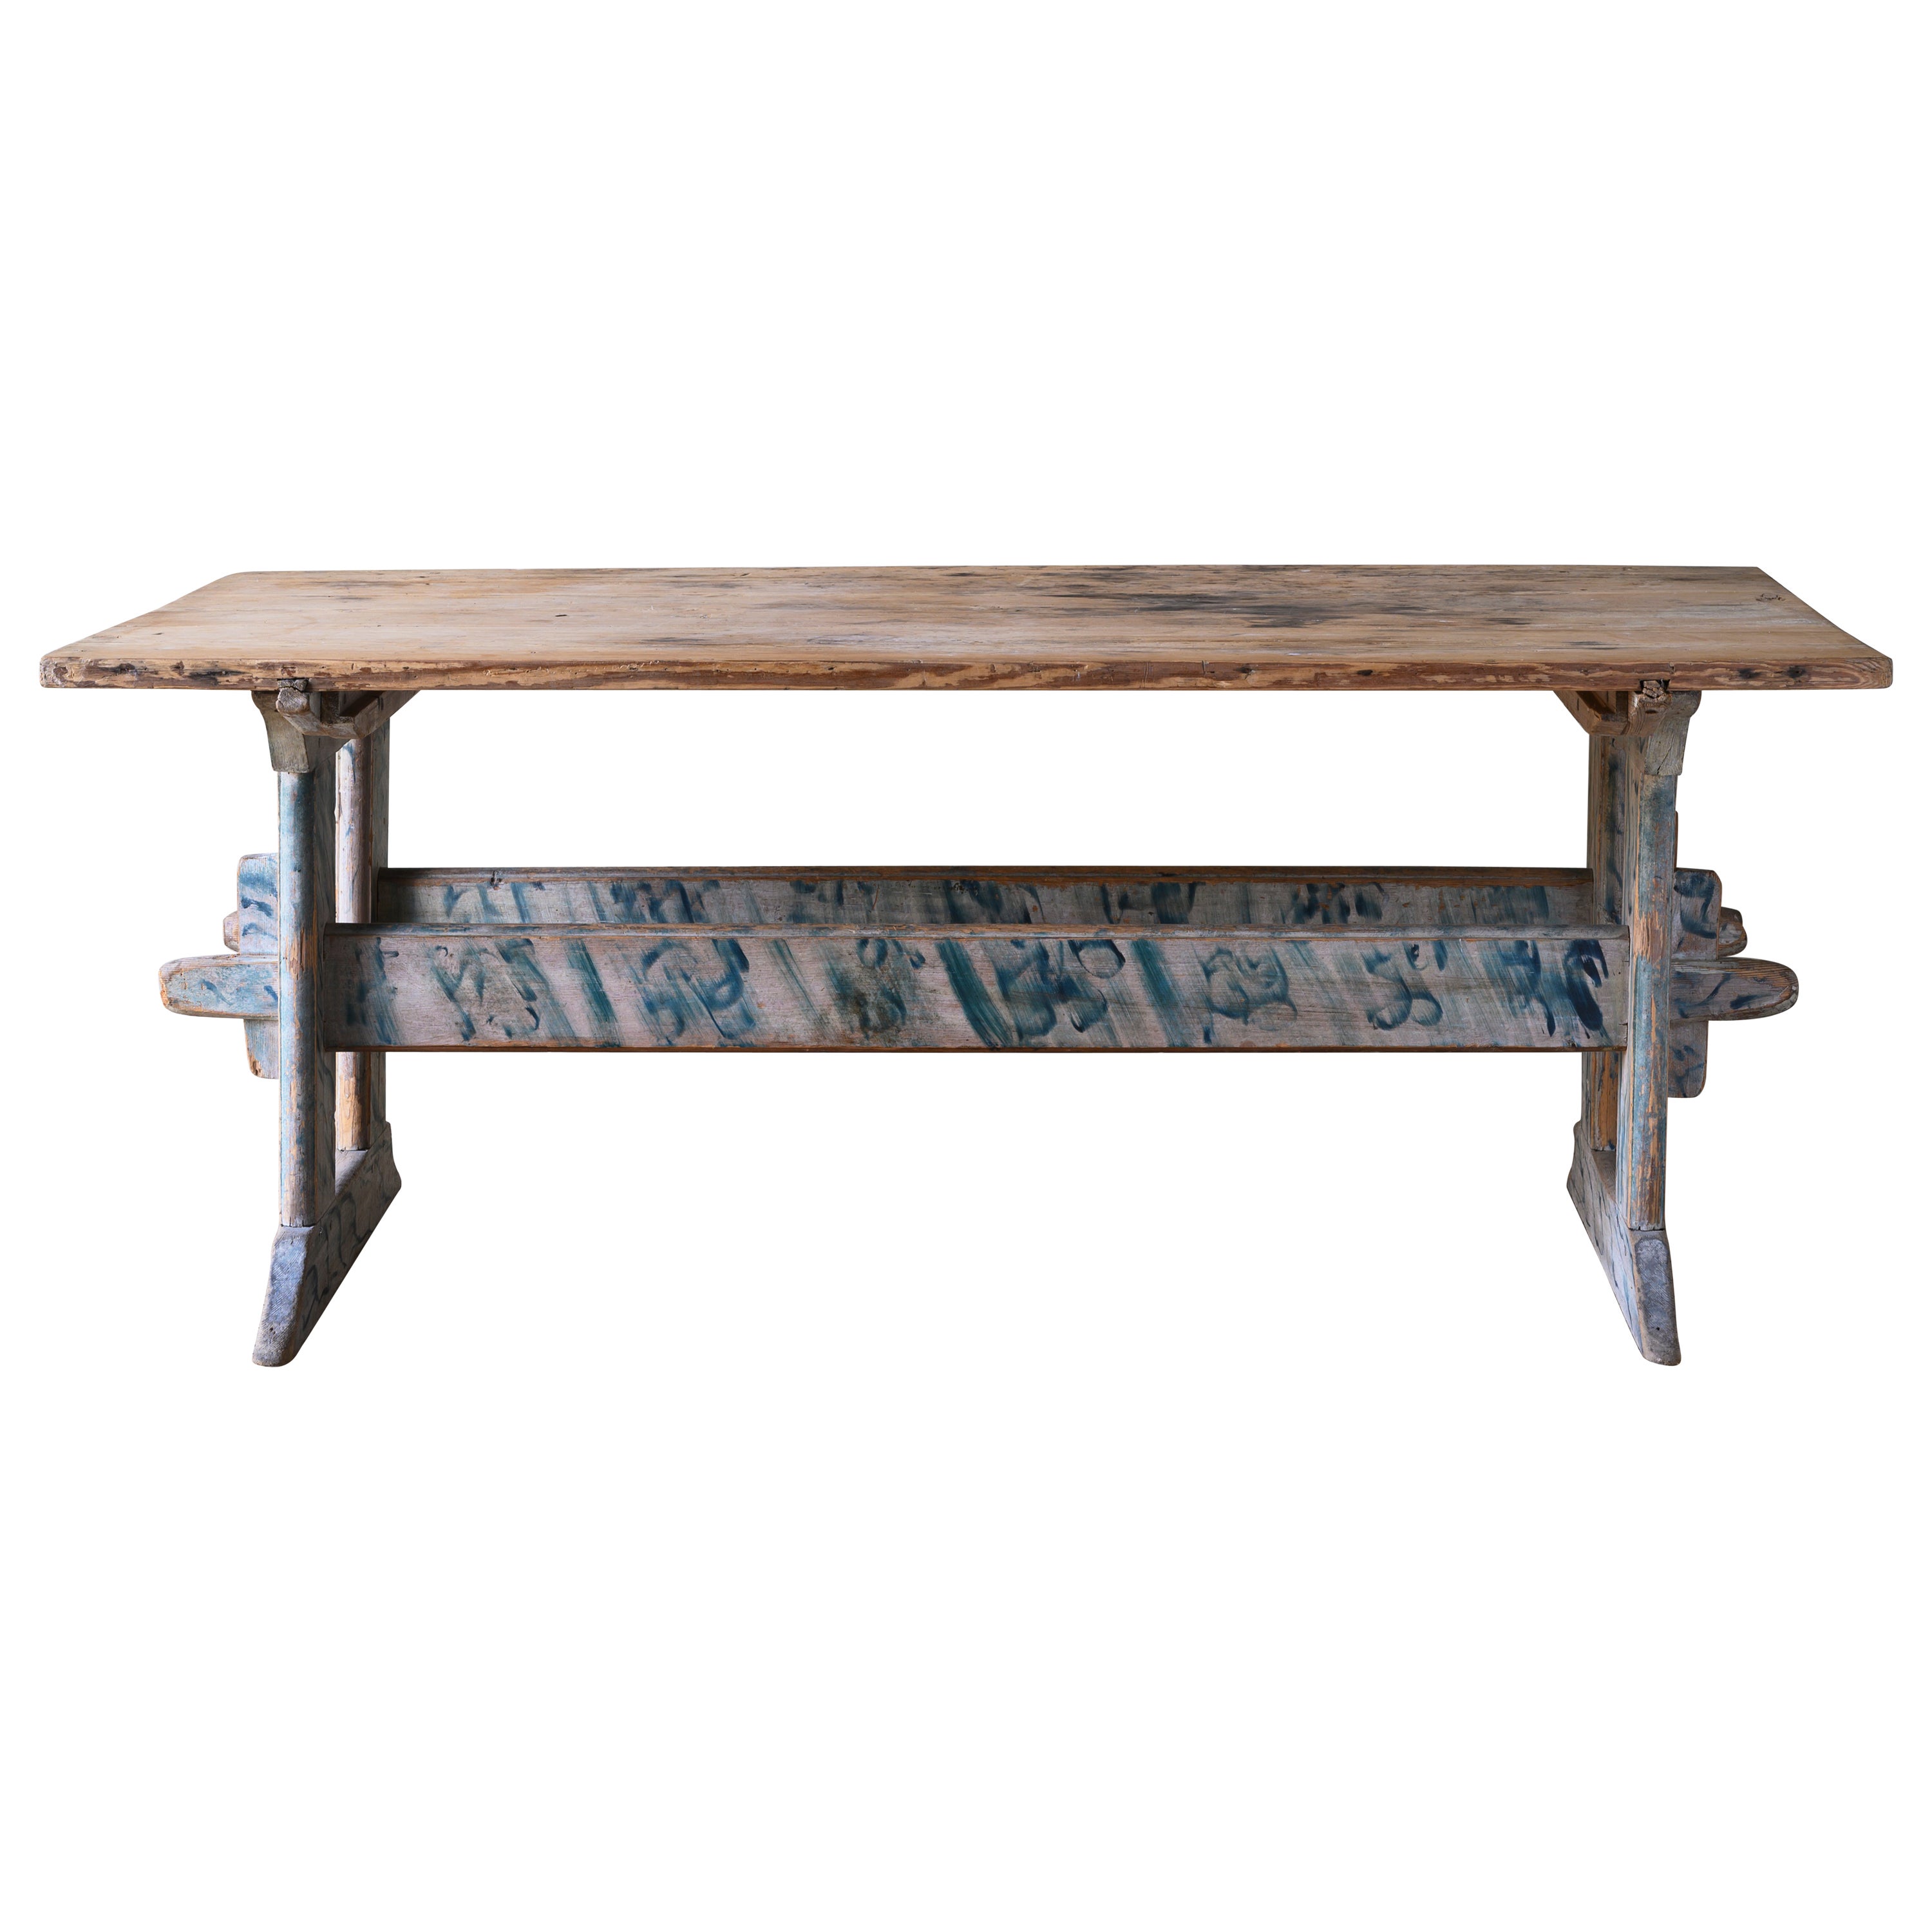 Exceptional Early 19th Century Swedish Trestle Table